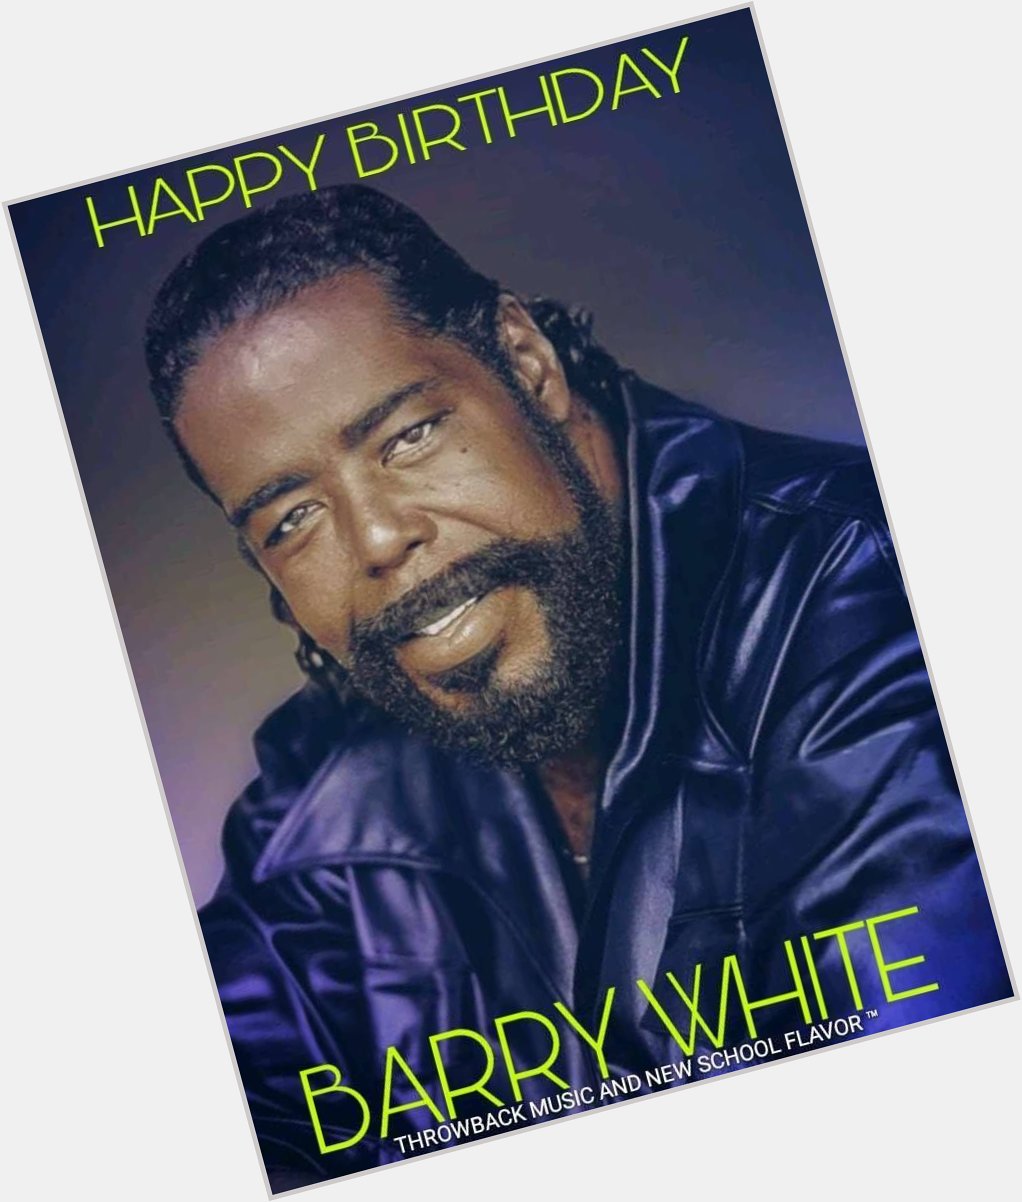 Happy Birthday to Late Smooth R&B Singer Mr Barry White          